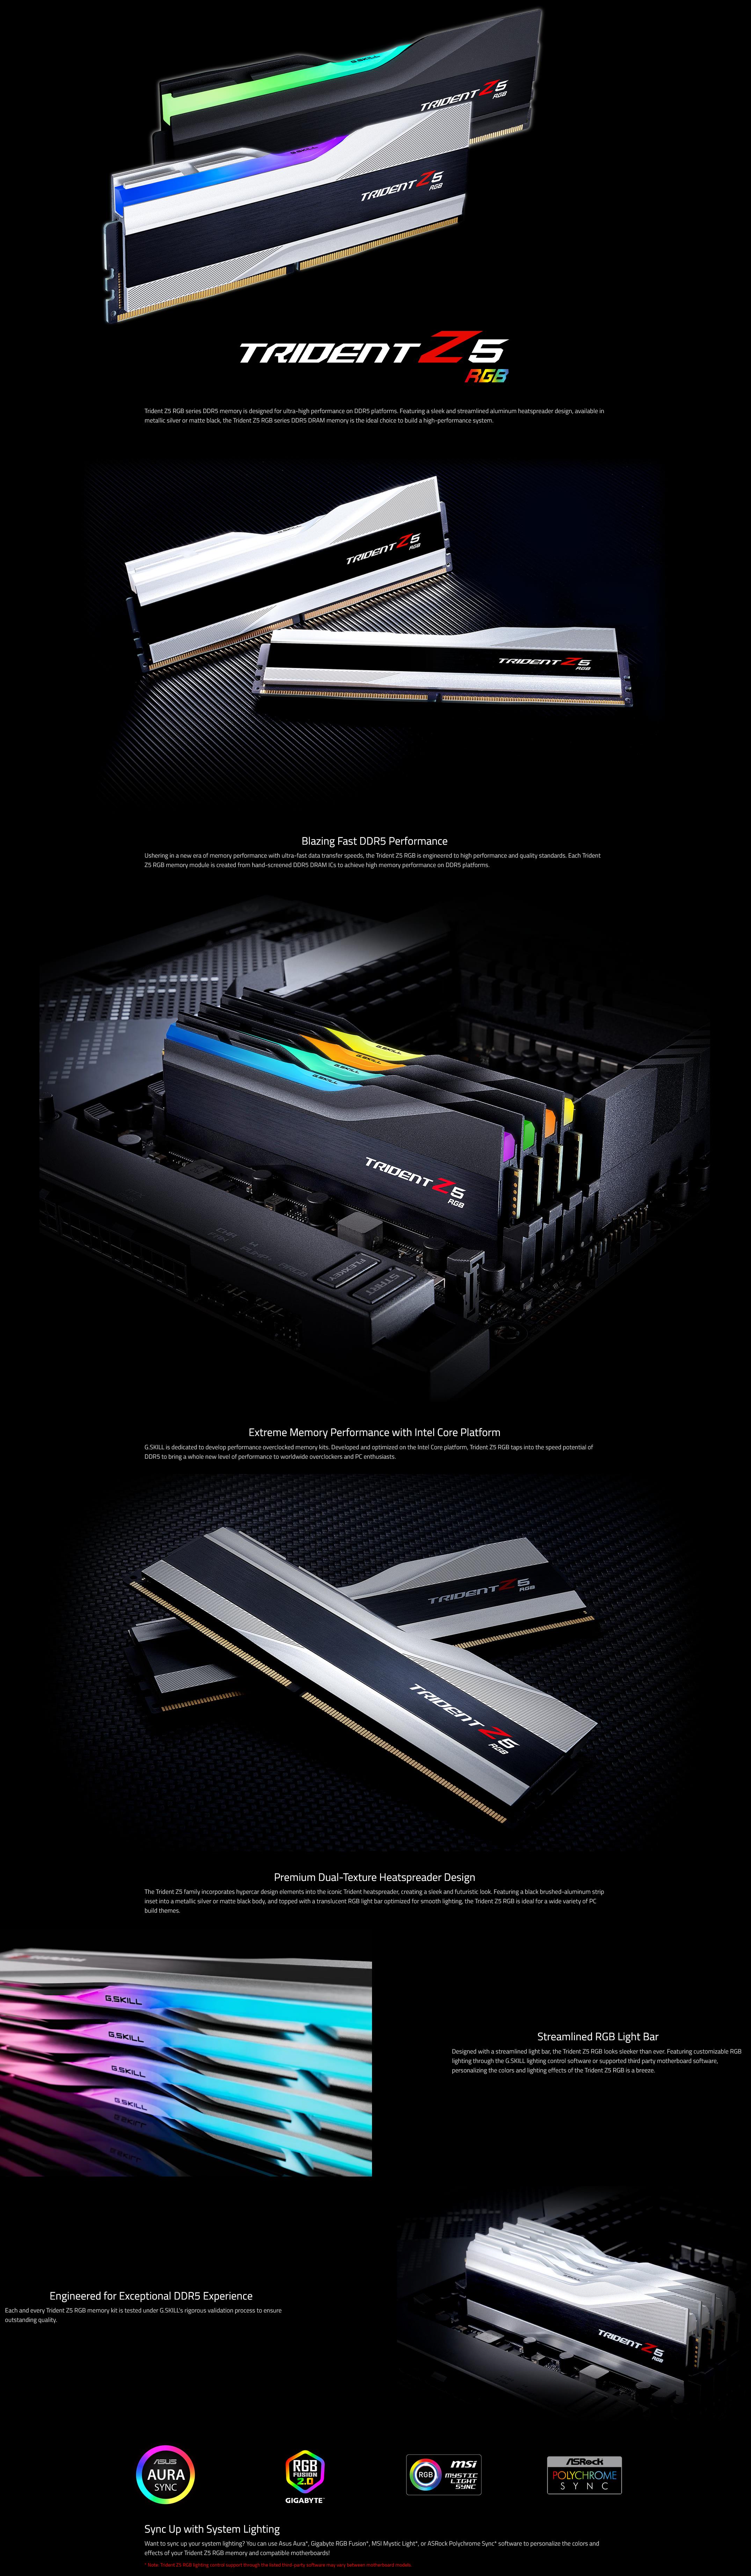 A large marketing image providing additional information about the product G.Skill 32GB Kit (2x16GB) DDR5 Trident Z5 RGB C36 7600MHz - Black - Additional alt info not provided